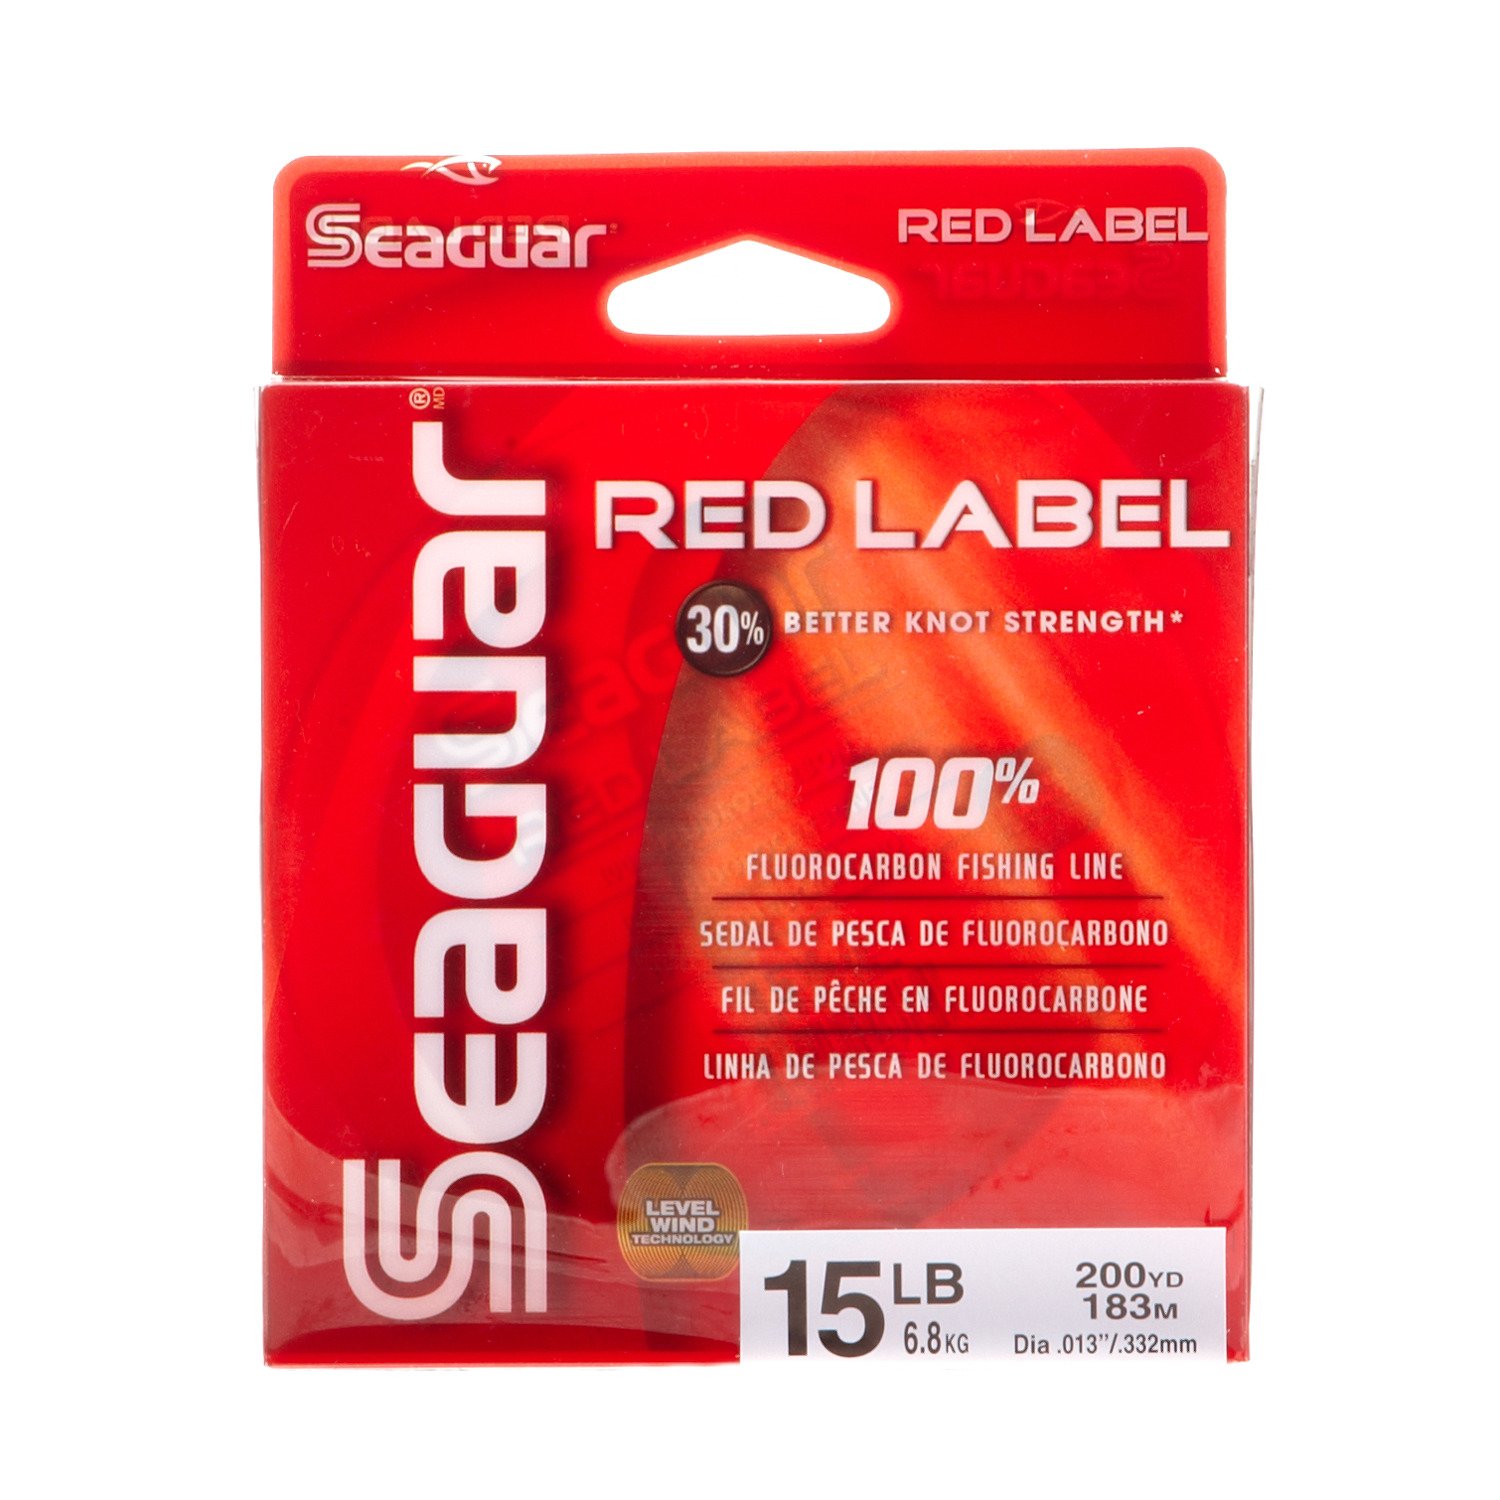 Seaguar Red Label Fluorocarbon 4lb 200yds - Gagnon Sporting Goods